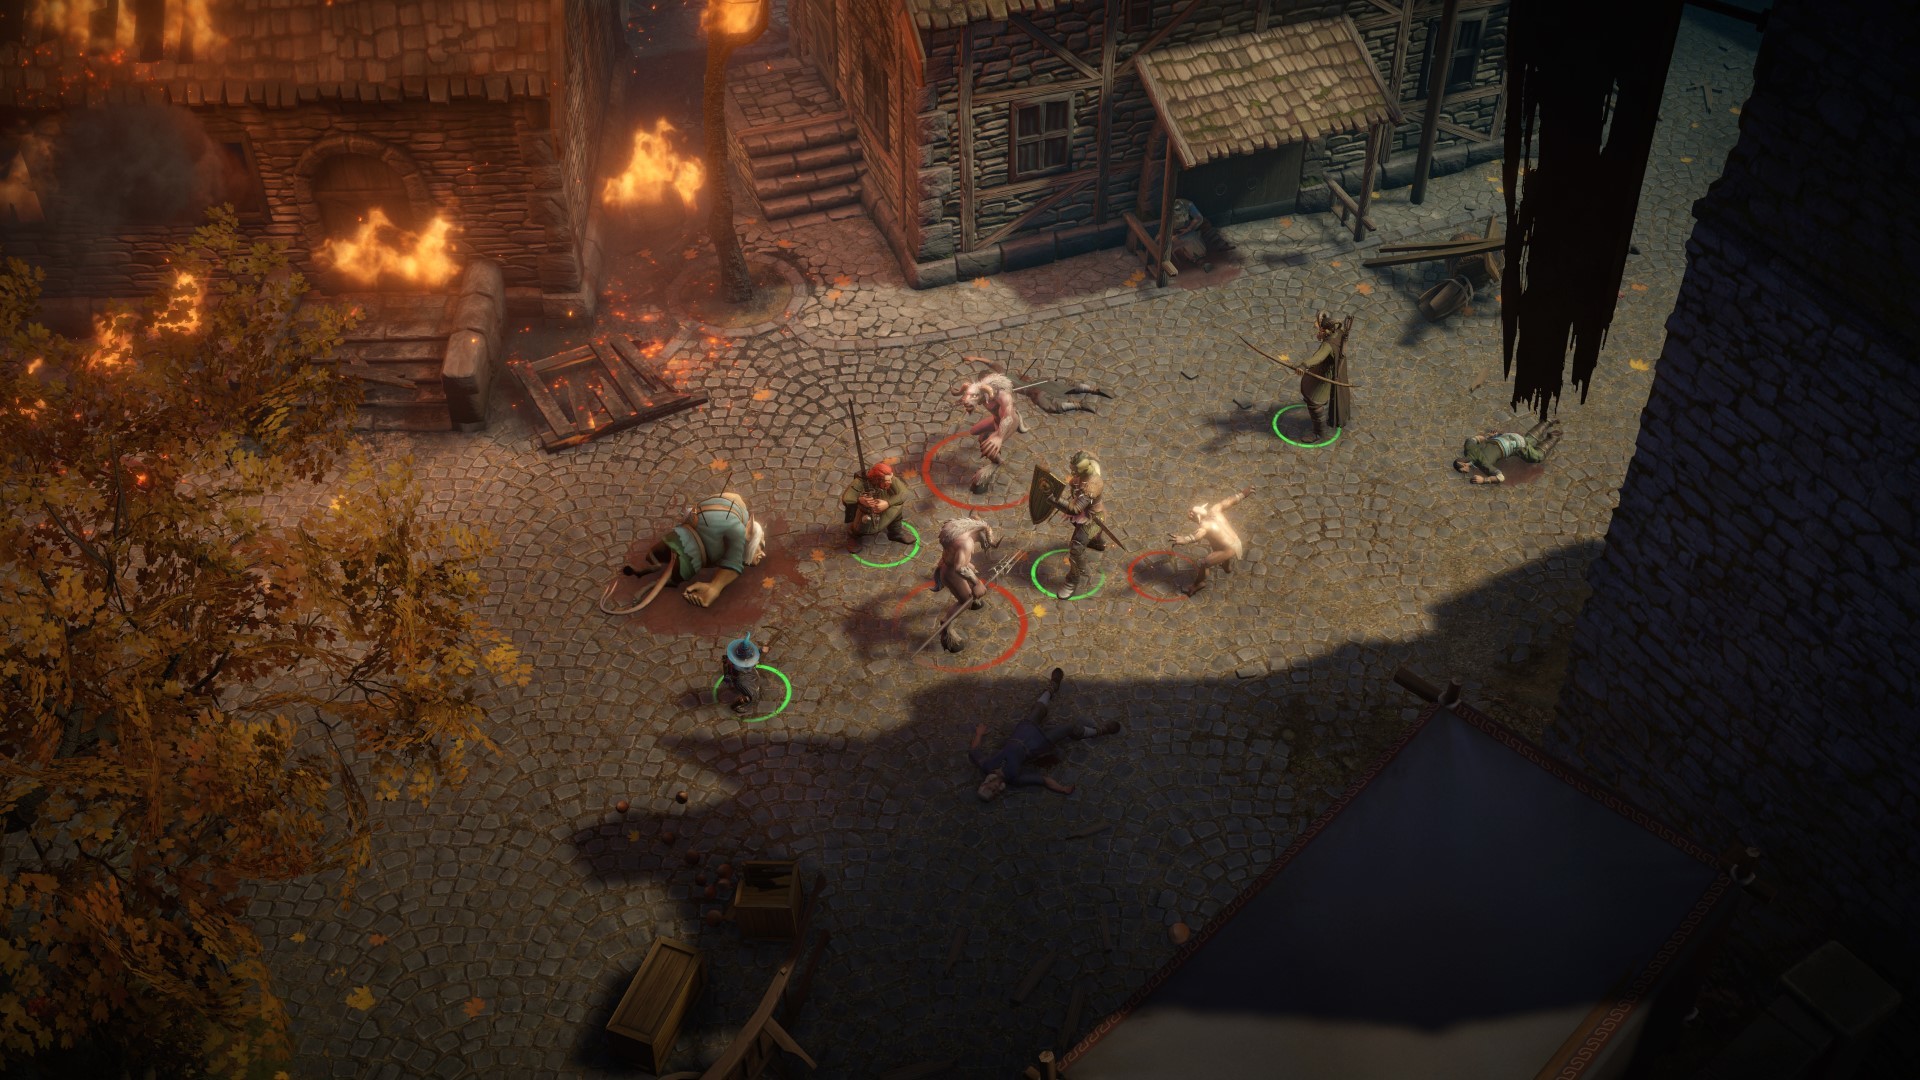 Pathfinder: Wrath of the Righteous - Through the Ashes Free Download for PC